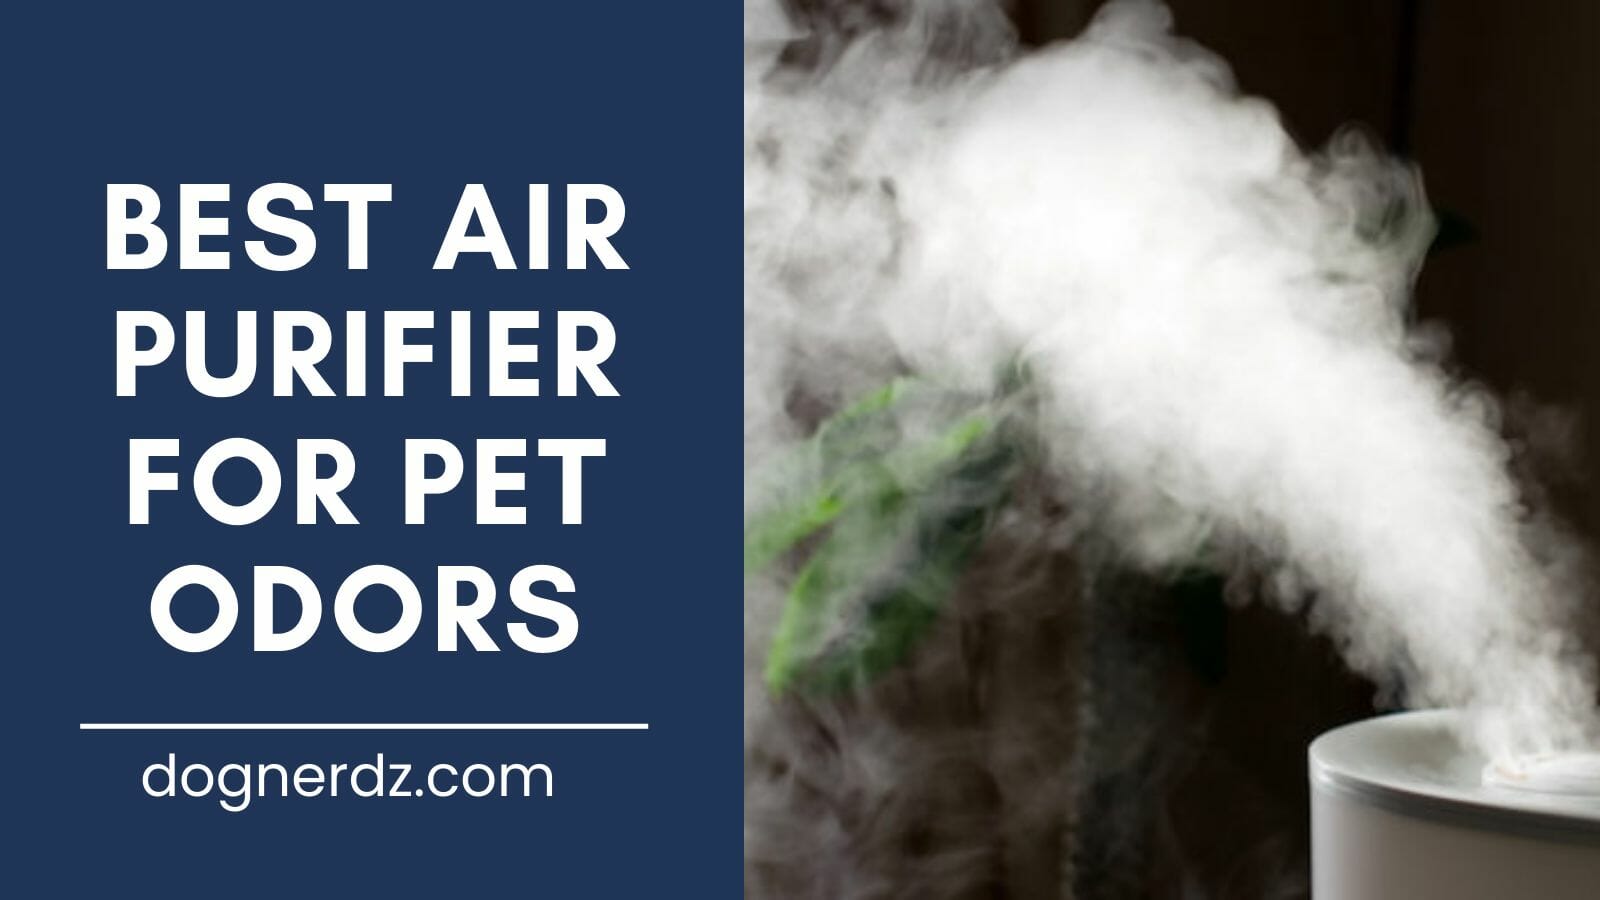 review of best air purifier for pet odors